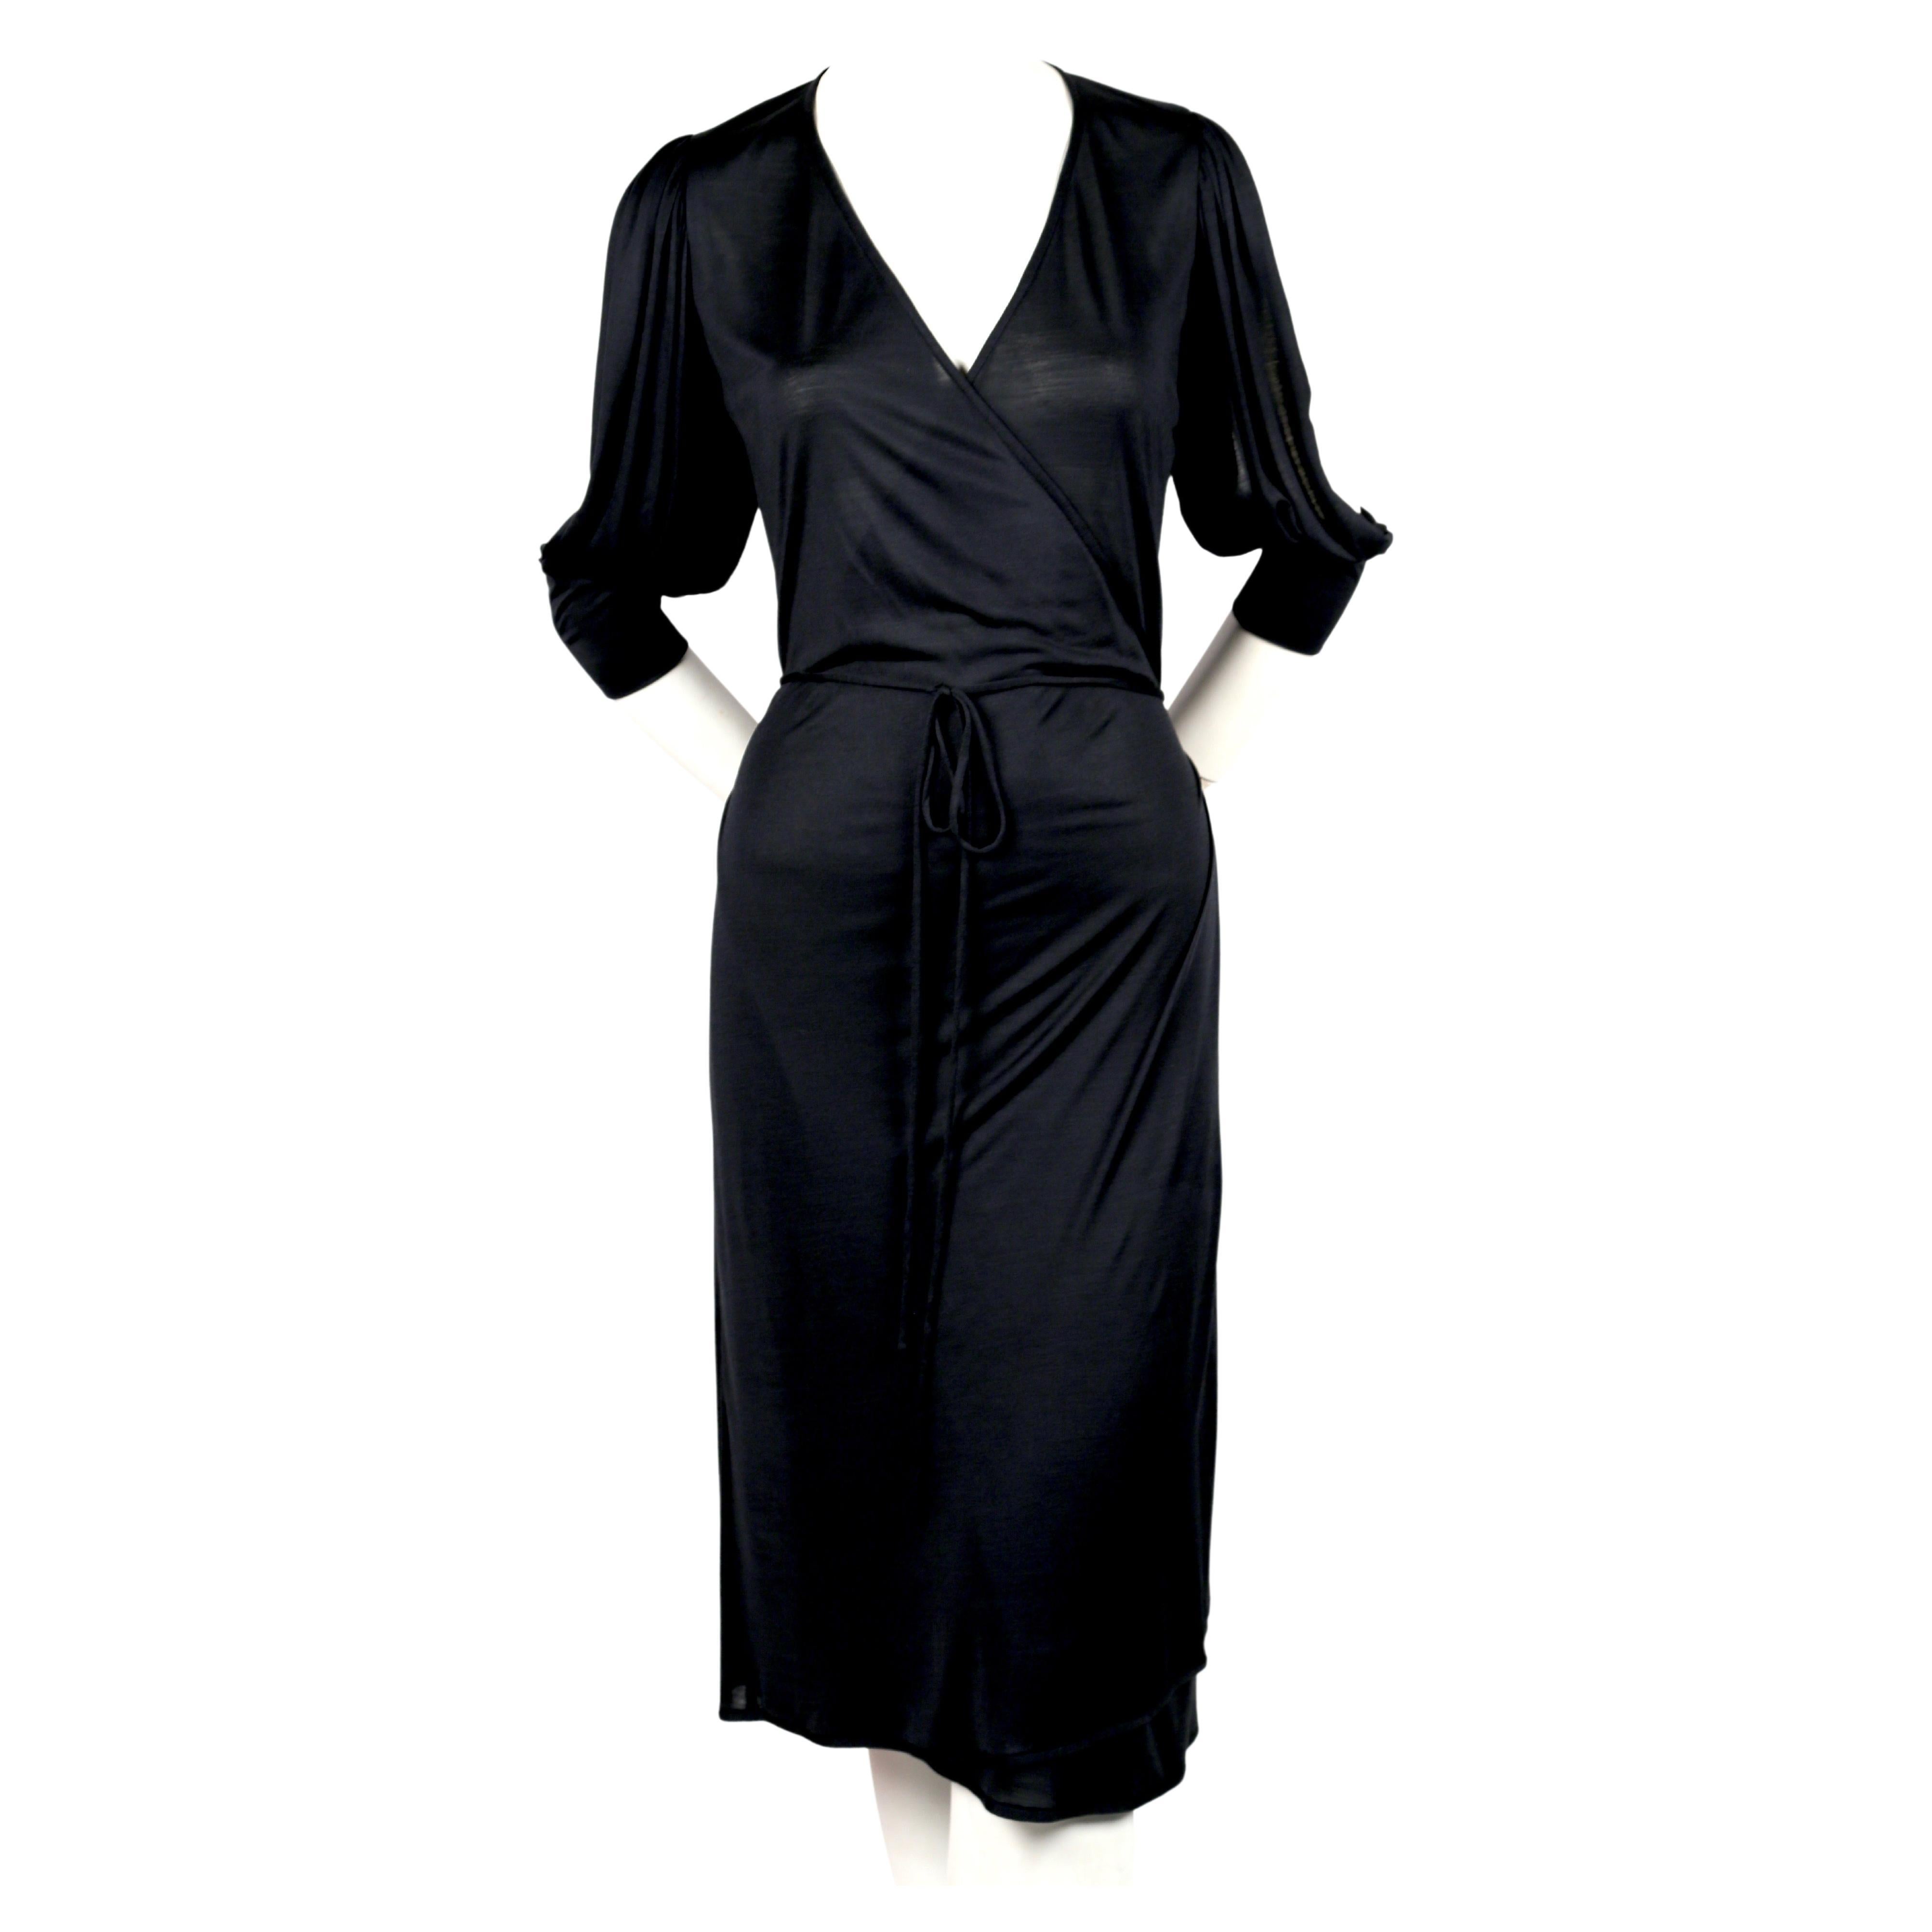 Inky blue-black jersey, wrap dress designed by Nicolas Ghesquiere for Balenciaga dating to spring of 2000. French size 36. Bust waist and hips are adjustable due to wrap closure however this best fits a French size 36. Approximate measurements: